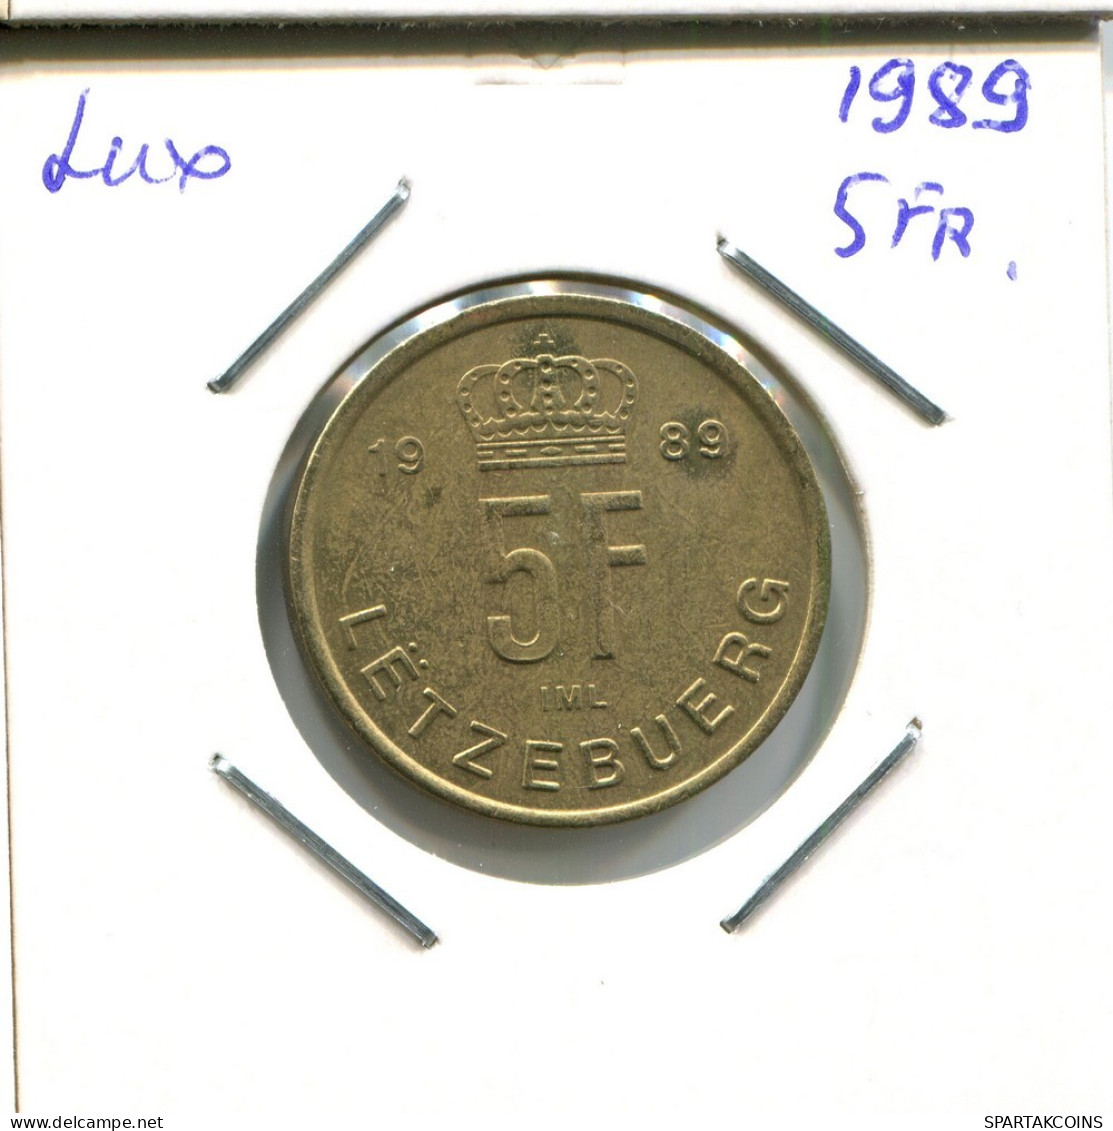 5 FRANCS 1989 LUXEMBURG LUXEMBOURG Münze #AT236.D.A - Luxemburg